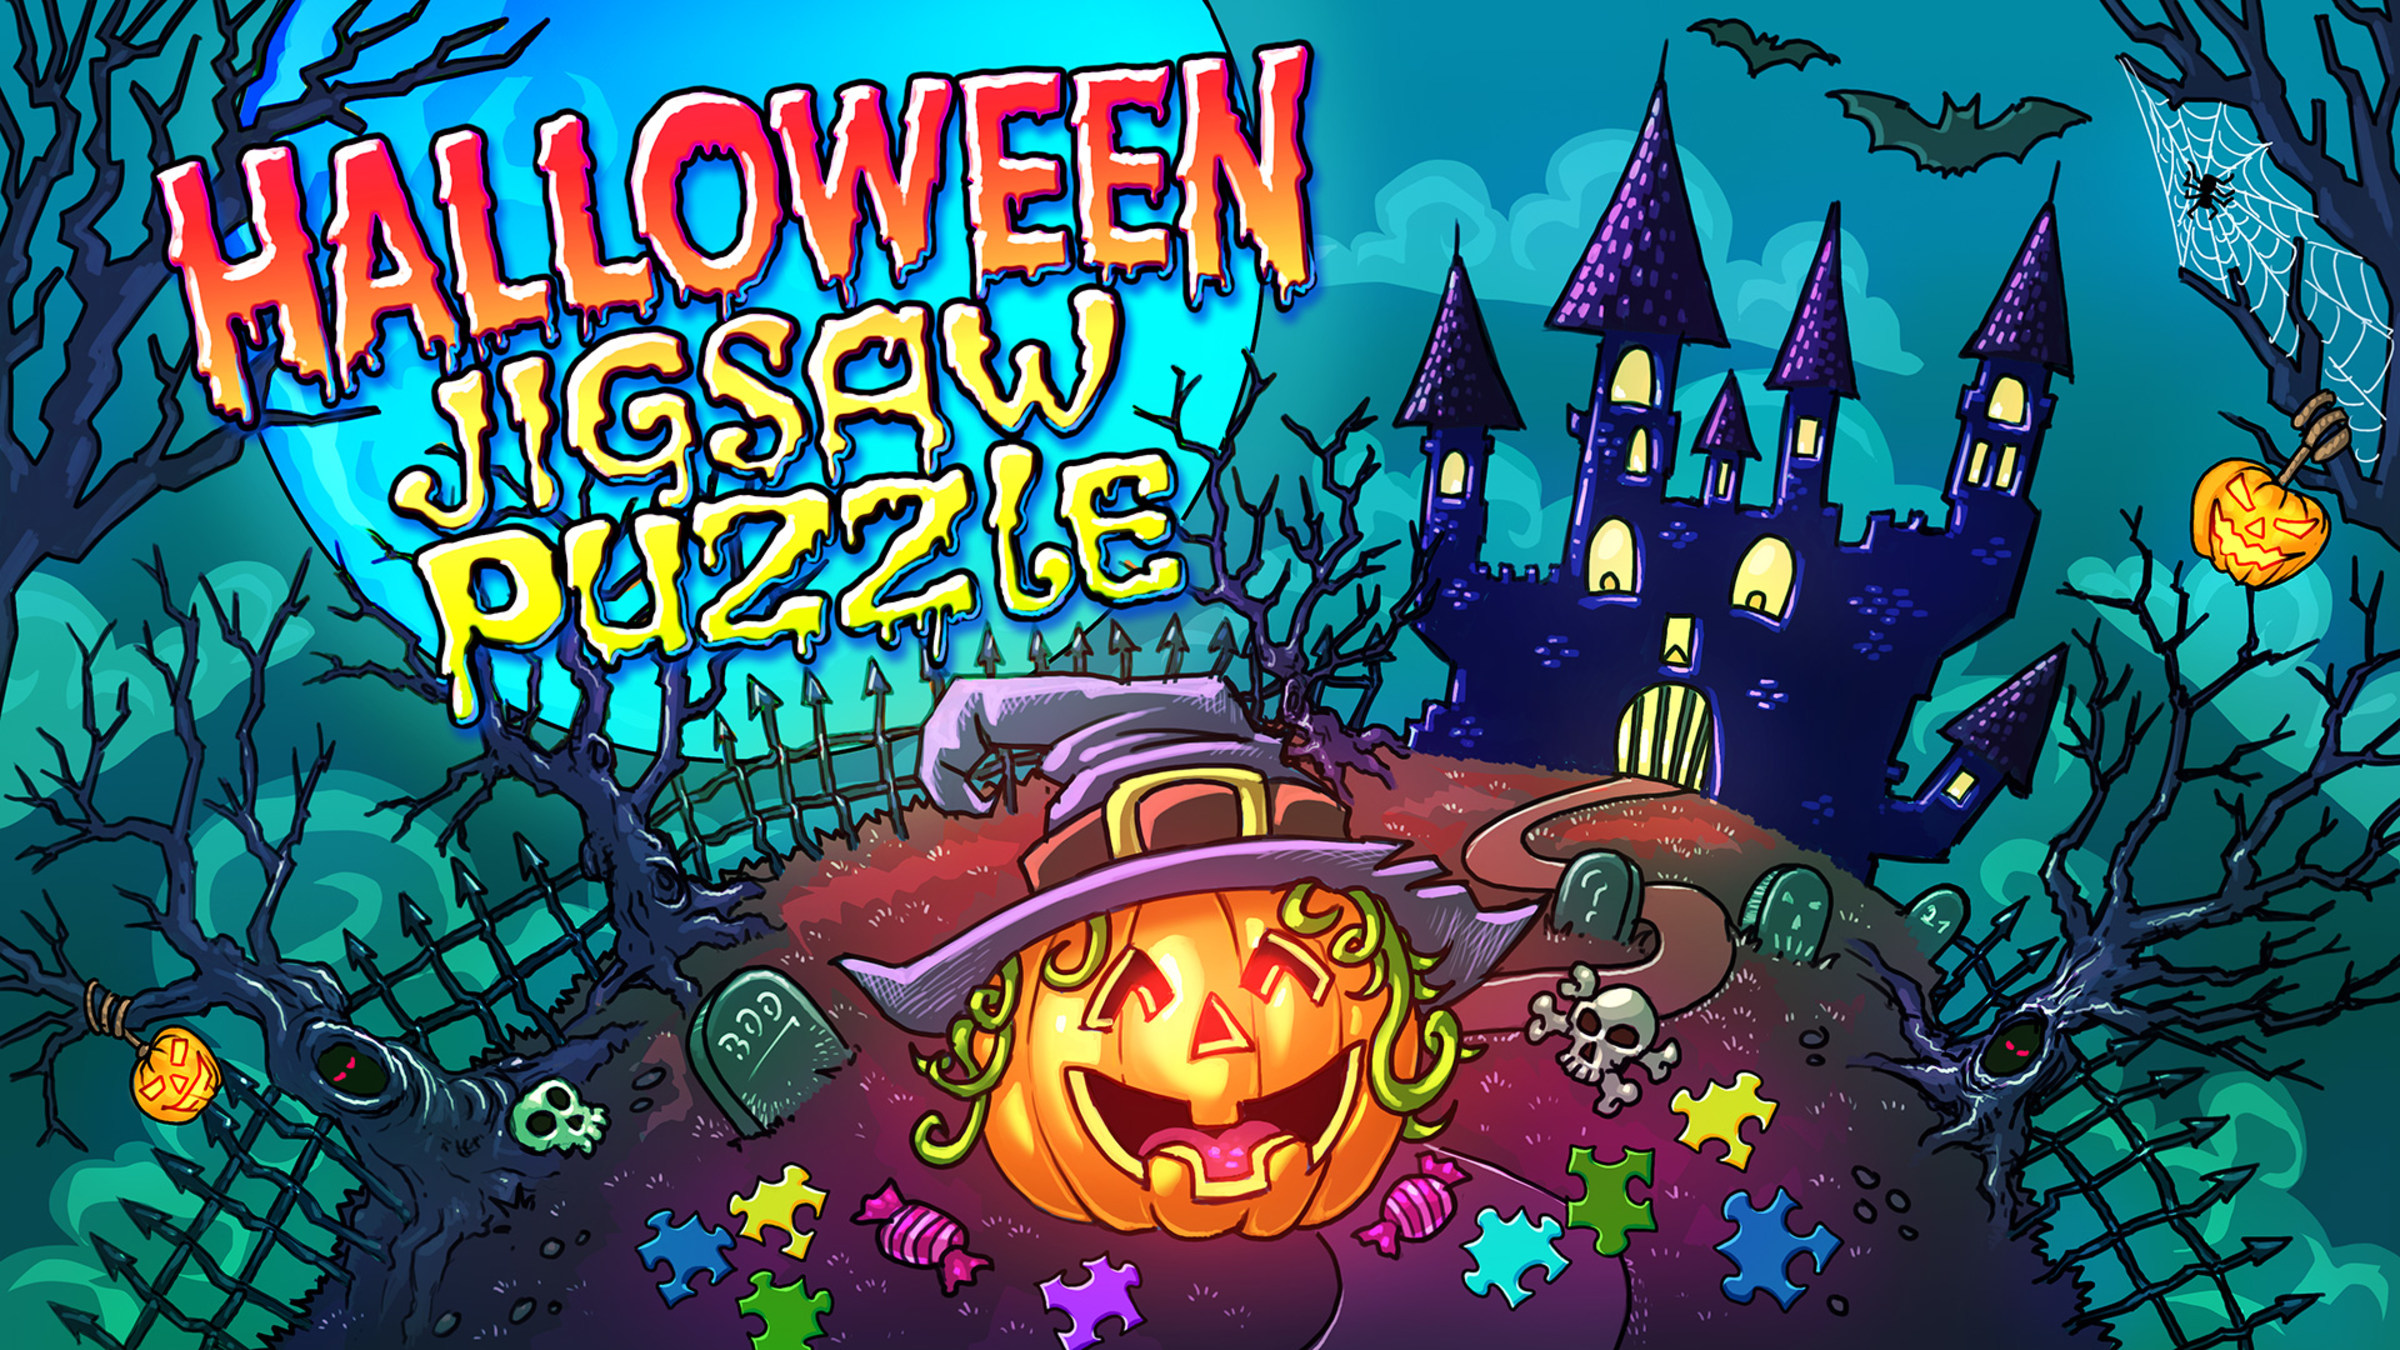 Puzzle Games – Free Online Fun Jigsaw Puzzle Games for Kids, Children